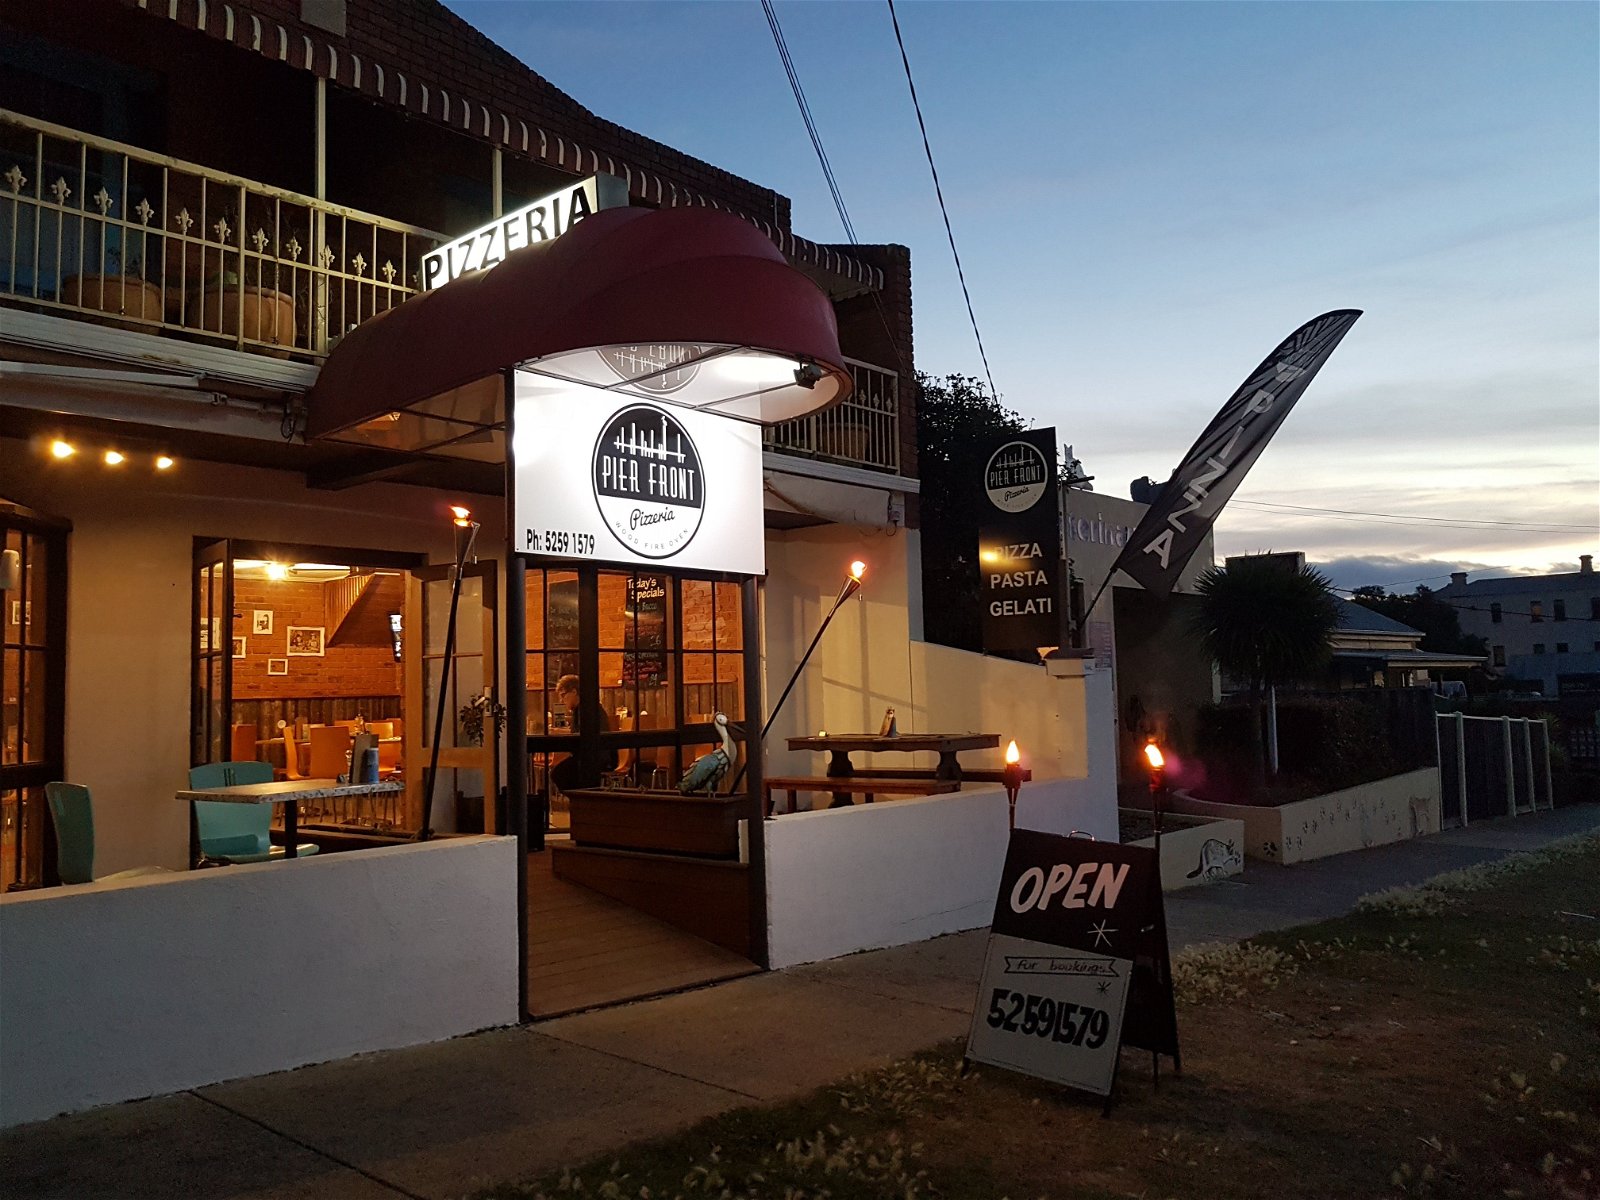 Pier Front Pizzeria - Northern Rivers Accommodation